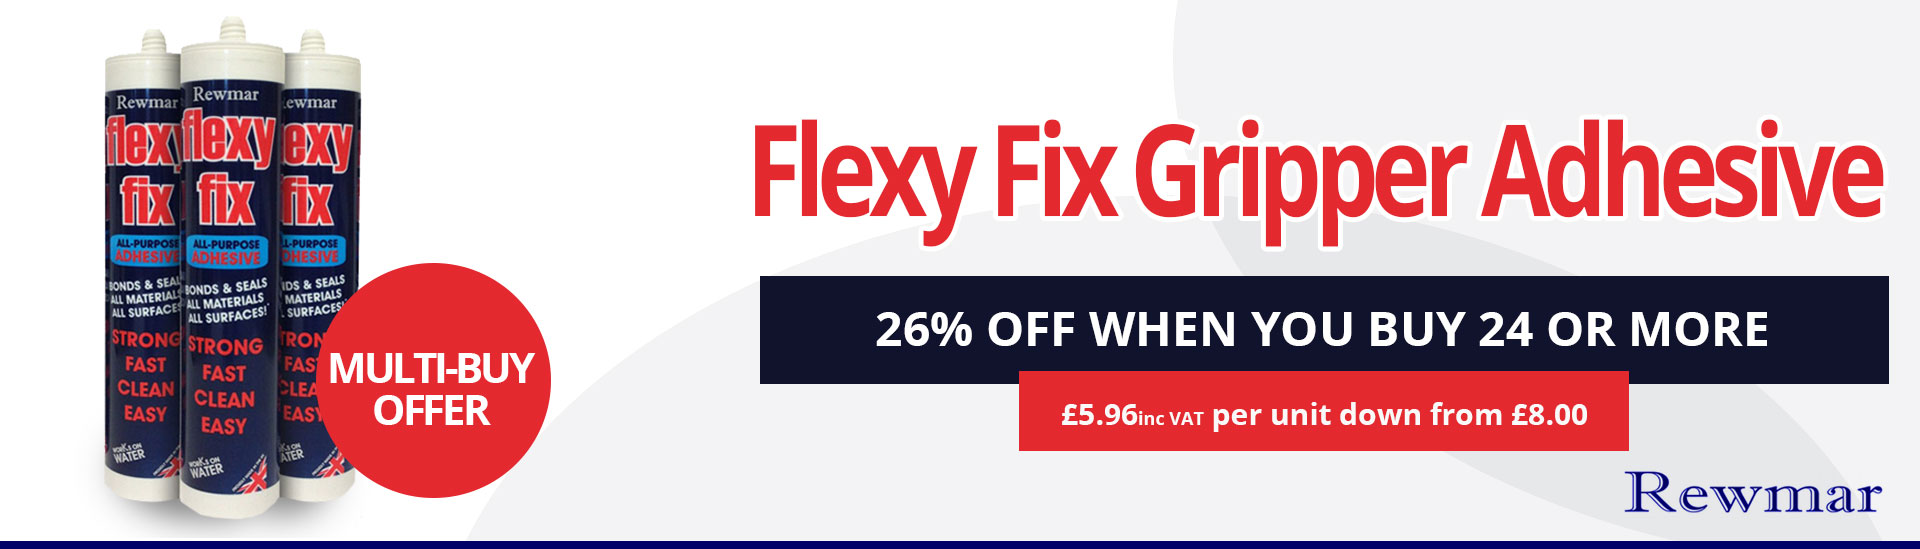 Rewmar Flexy Fix Gripper Adhesive - 26% off when you buy 24 or more